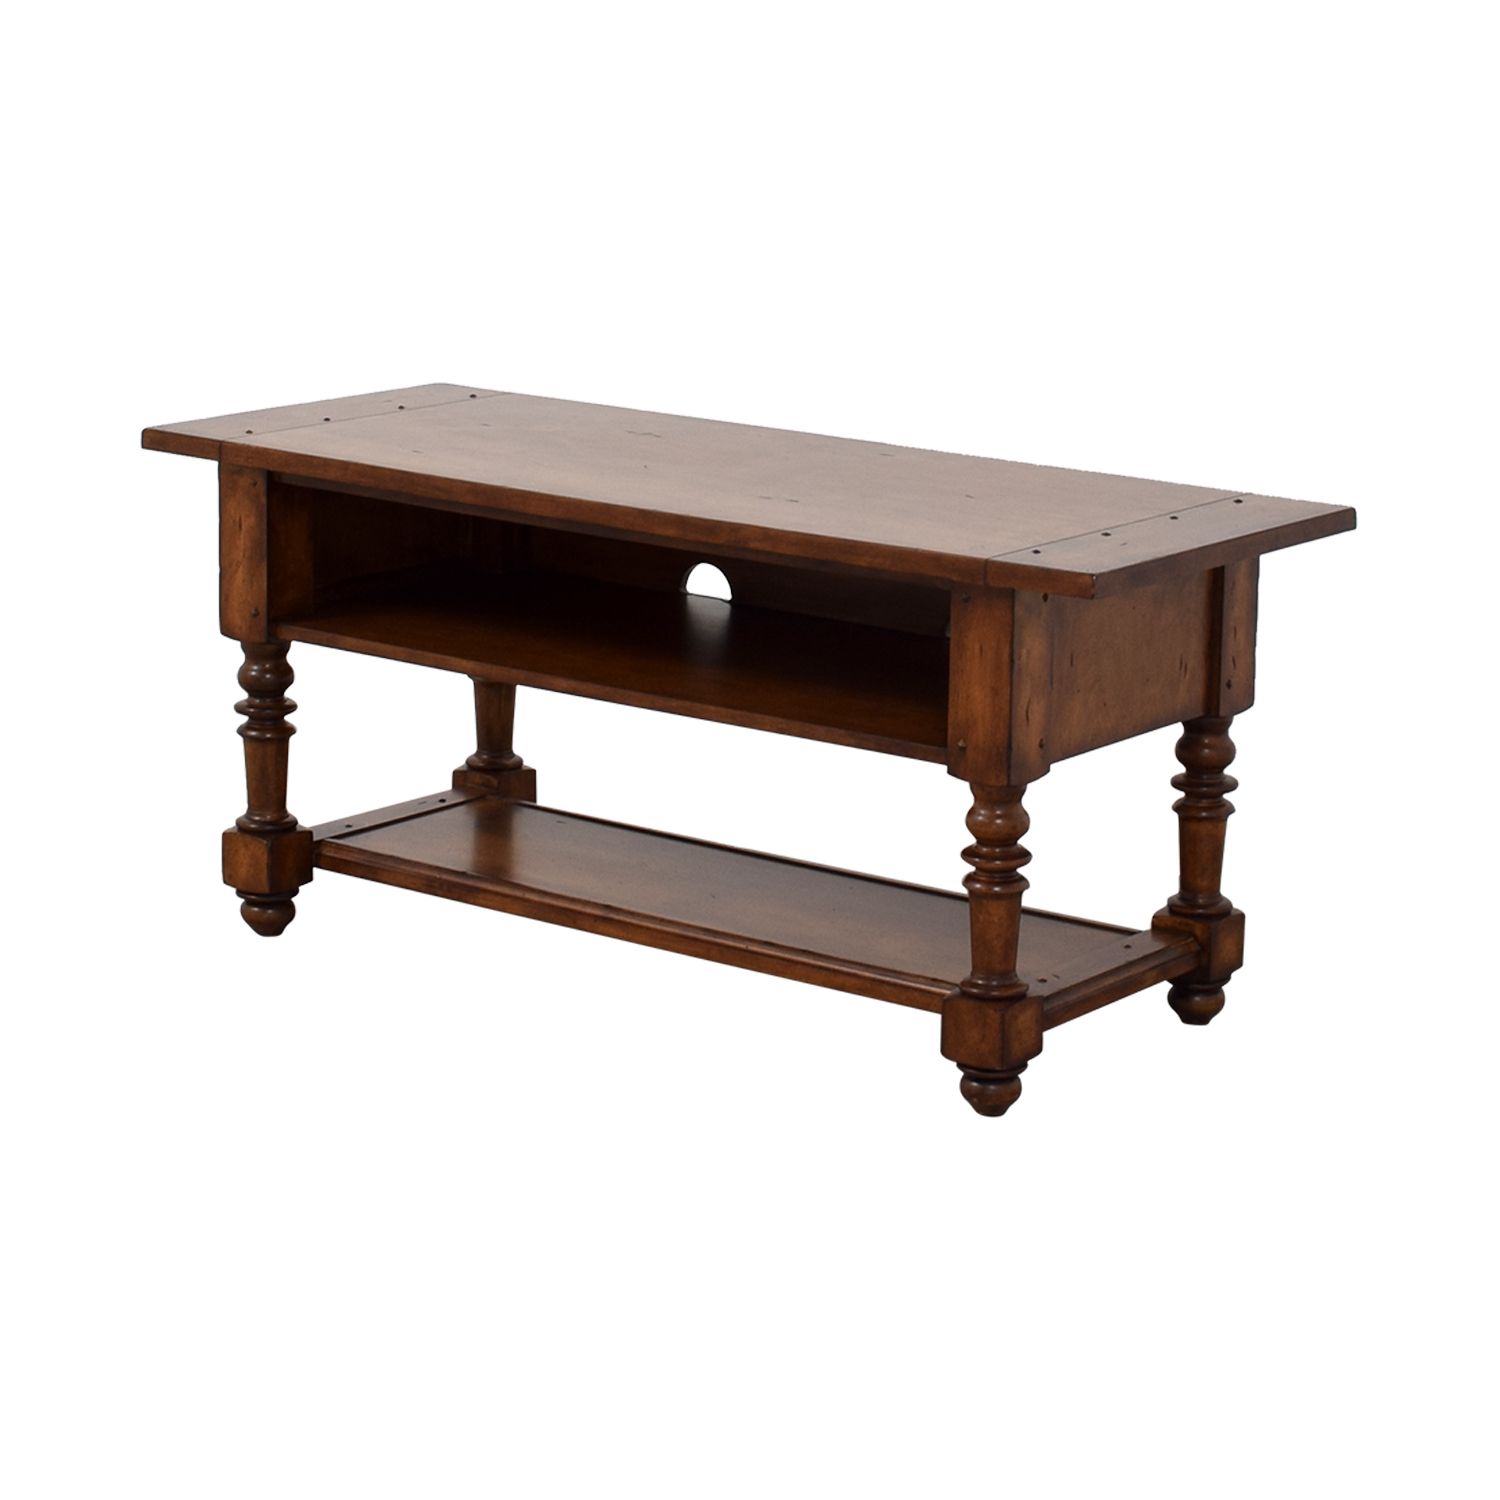 [%90% Off – Pottery Barn Pottery Barn Como Wood Tv Stand / Storage Regarding Well Known Como Tv Stands|como Tv Stands Within Preferred 90% Off – Pottery Barn Pottery Barn Como Wood Tv Stand / Storage|preferred Como Tv Stands With 90% Off – Pottery Barn Pottery Barn Como Wood Tv Stand / Storage|current 90% Off – Pottery Barn Pottery Barn Como Wood Tv Stand / Storage Regarding Como Tv Stands%] (Photo 8 of 20)